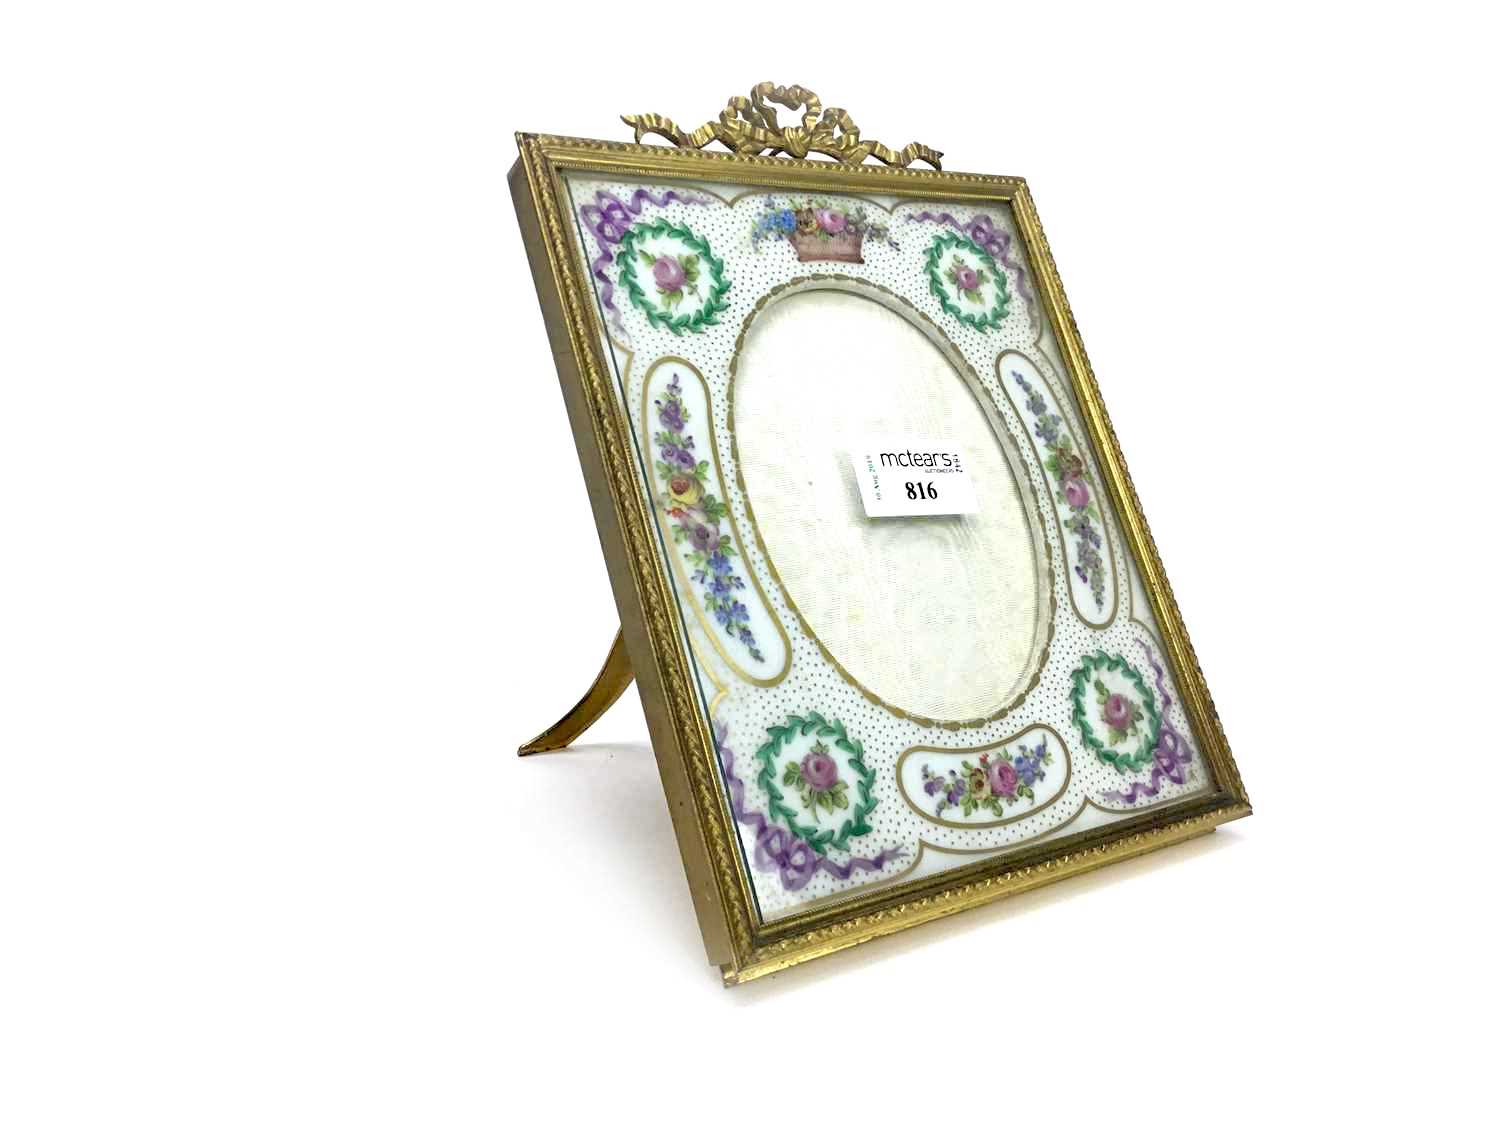 Lot 816 - A LATE VICTORIAN PHOTOGRAPH FRAME